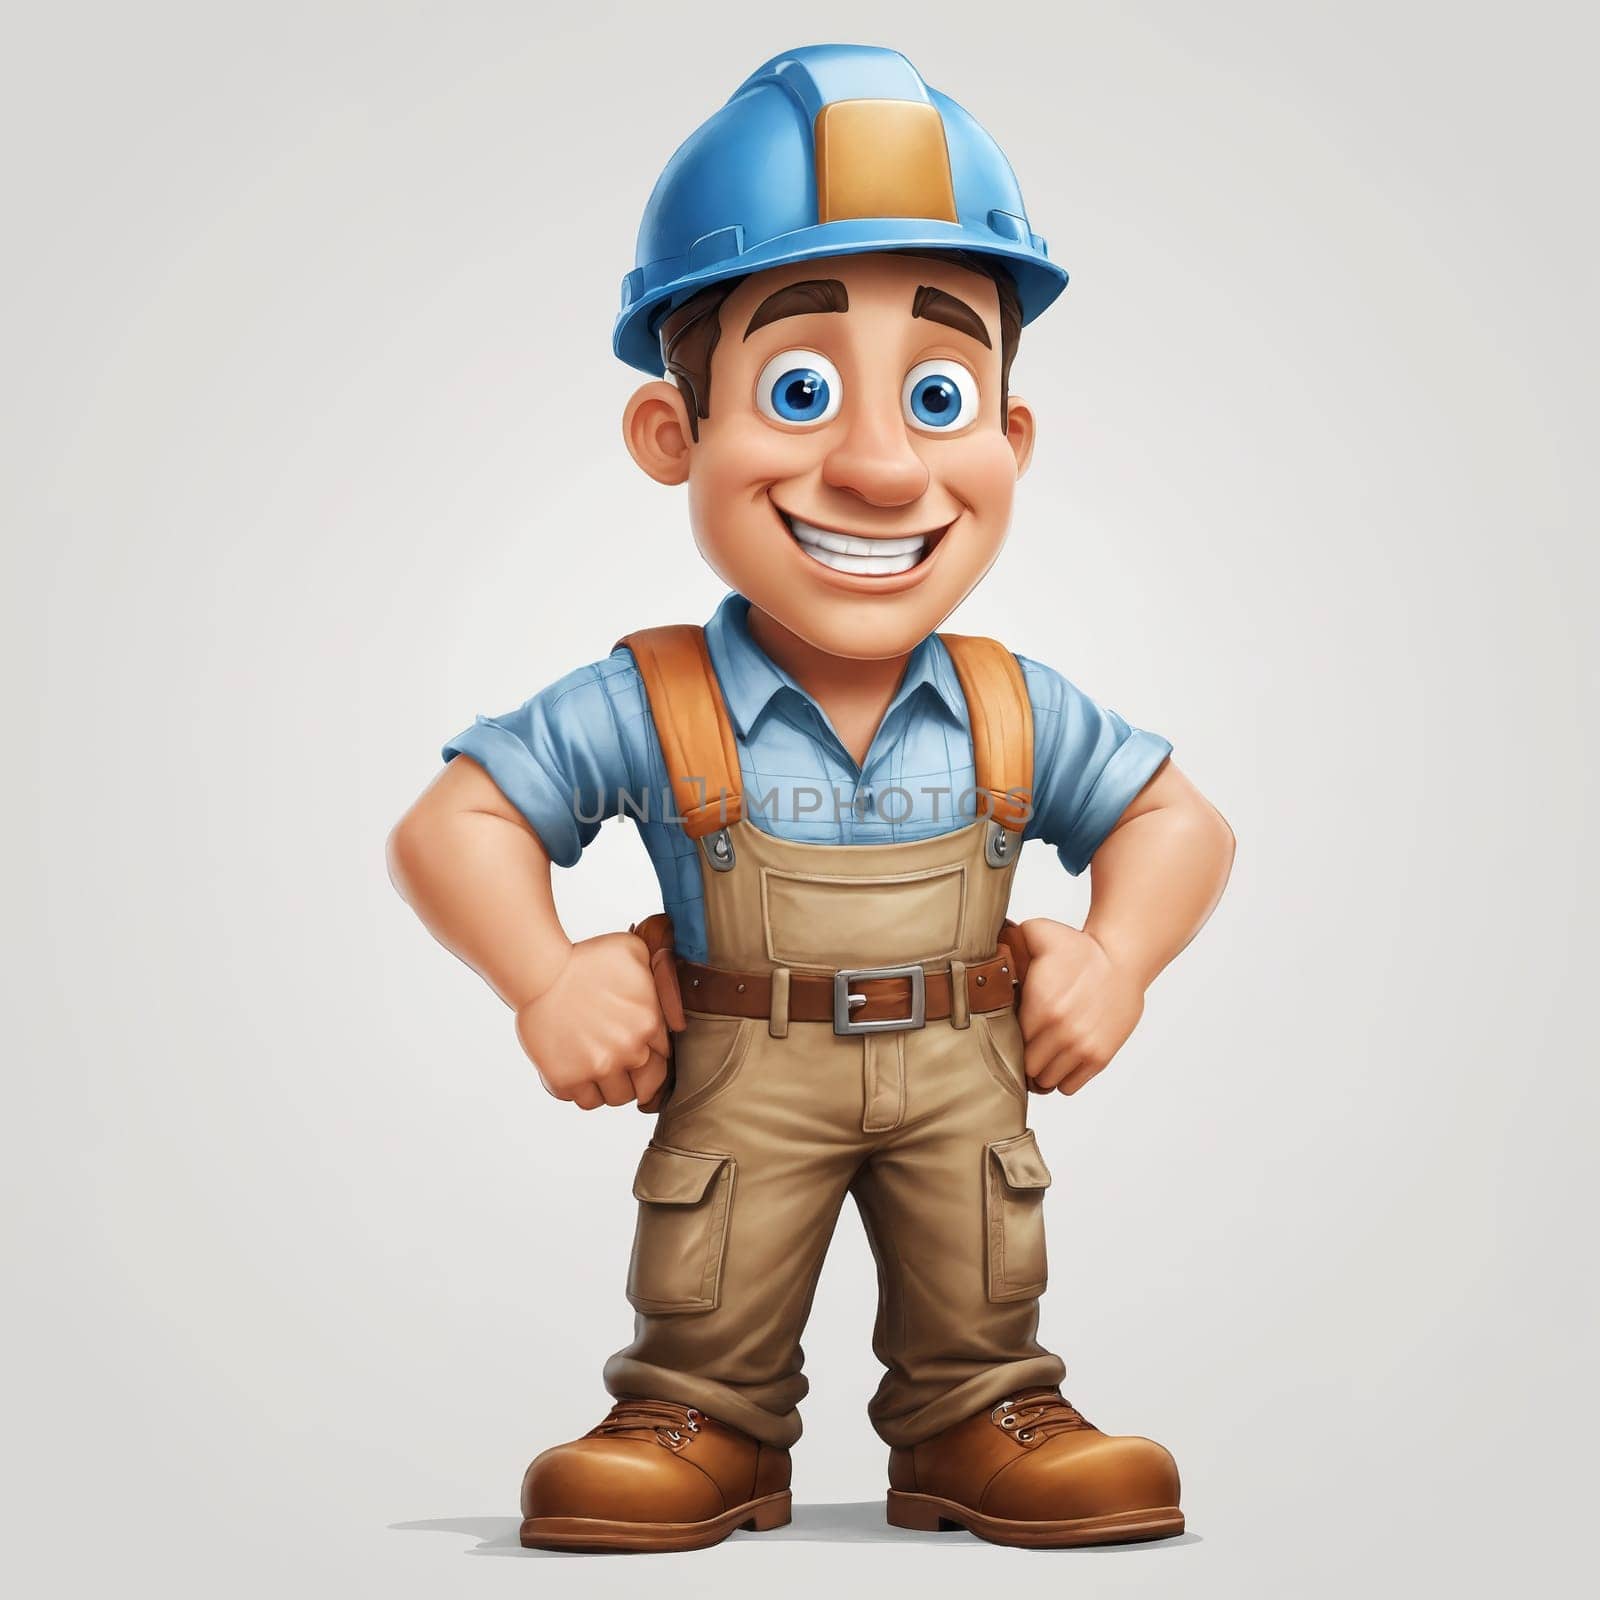 Job Well Done: Confident Worker with Tools and Hard Hat by Andre1ns